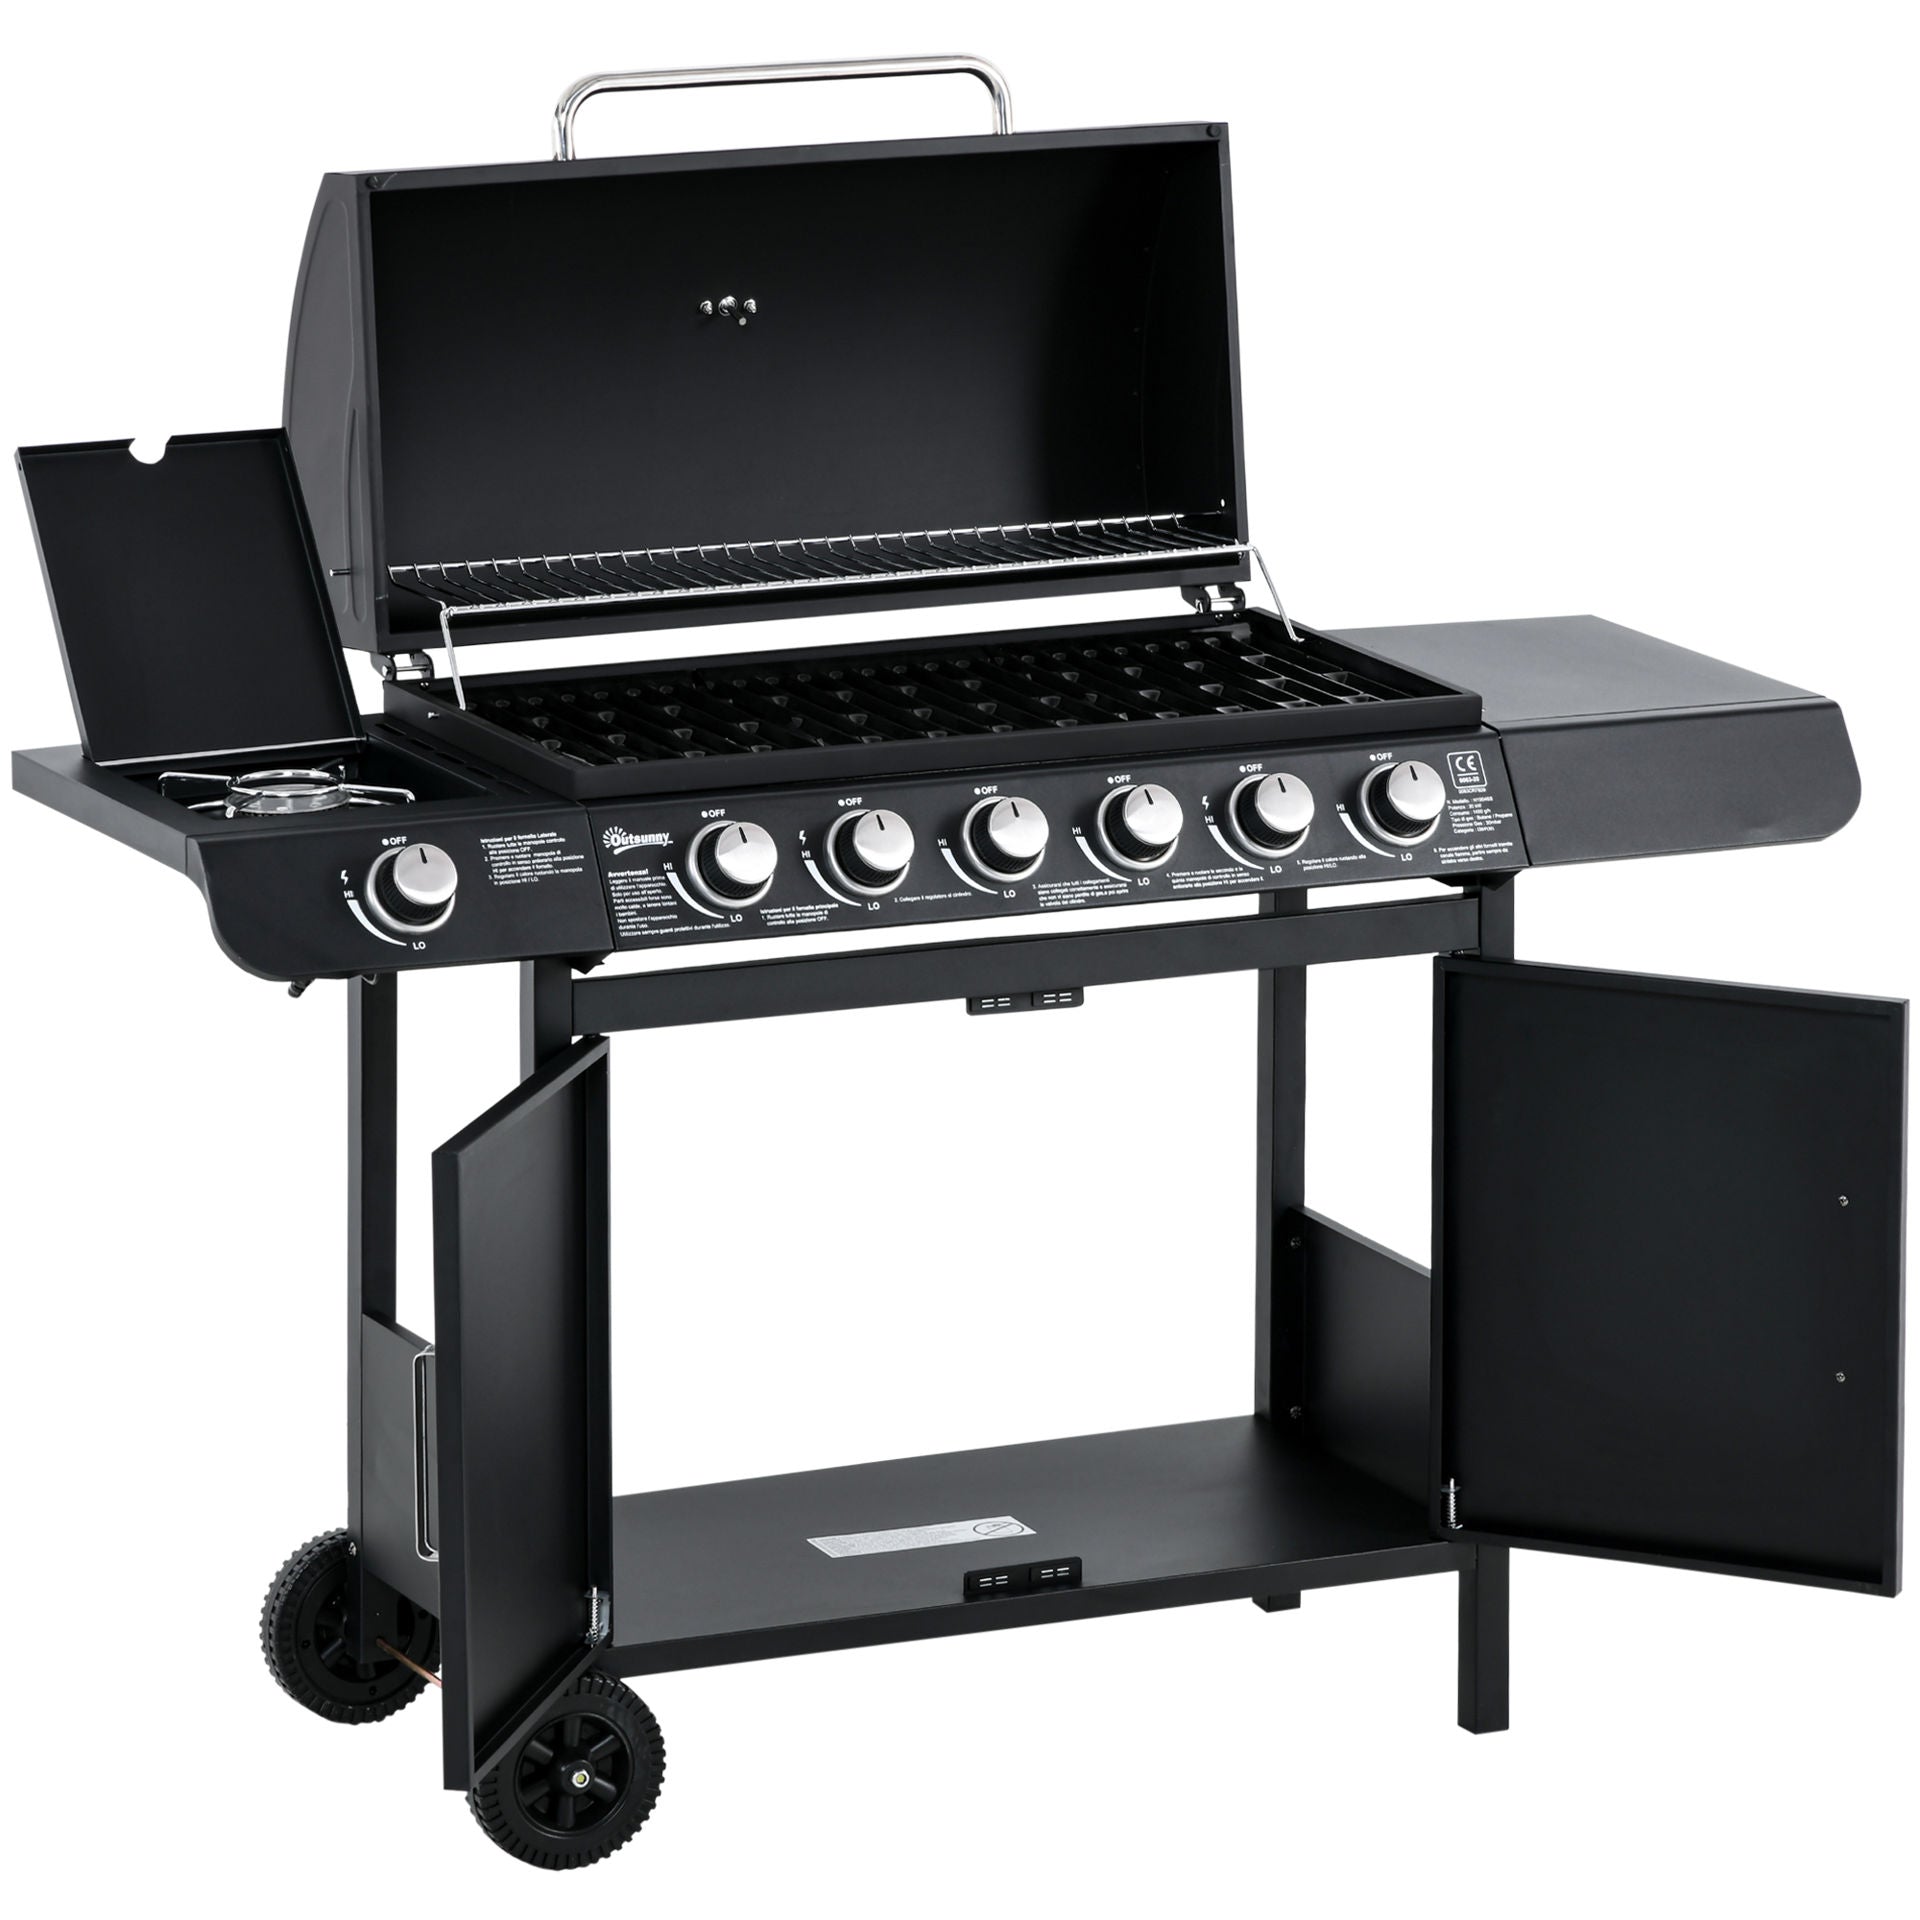 Nancy's Afton Barbecue with 7 burners and multifunctional cabinet - Grill - BBQ - Black - Steel